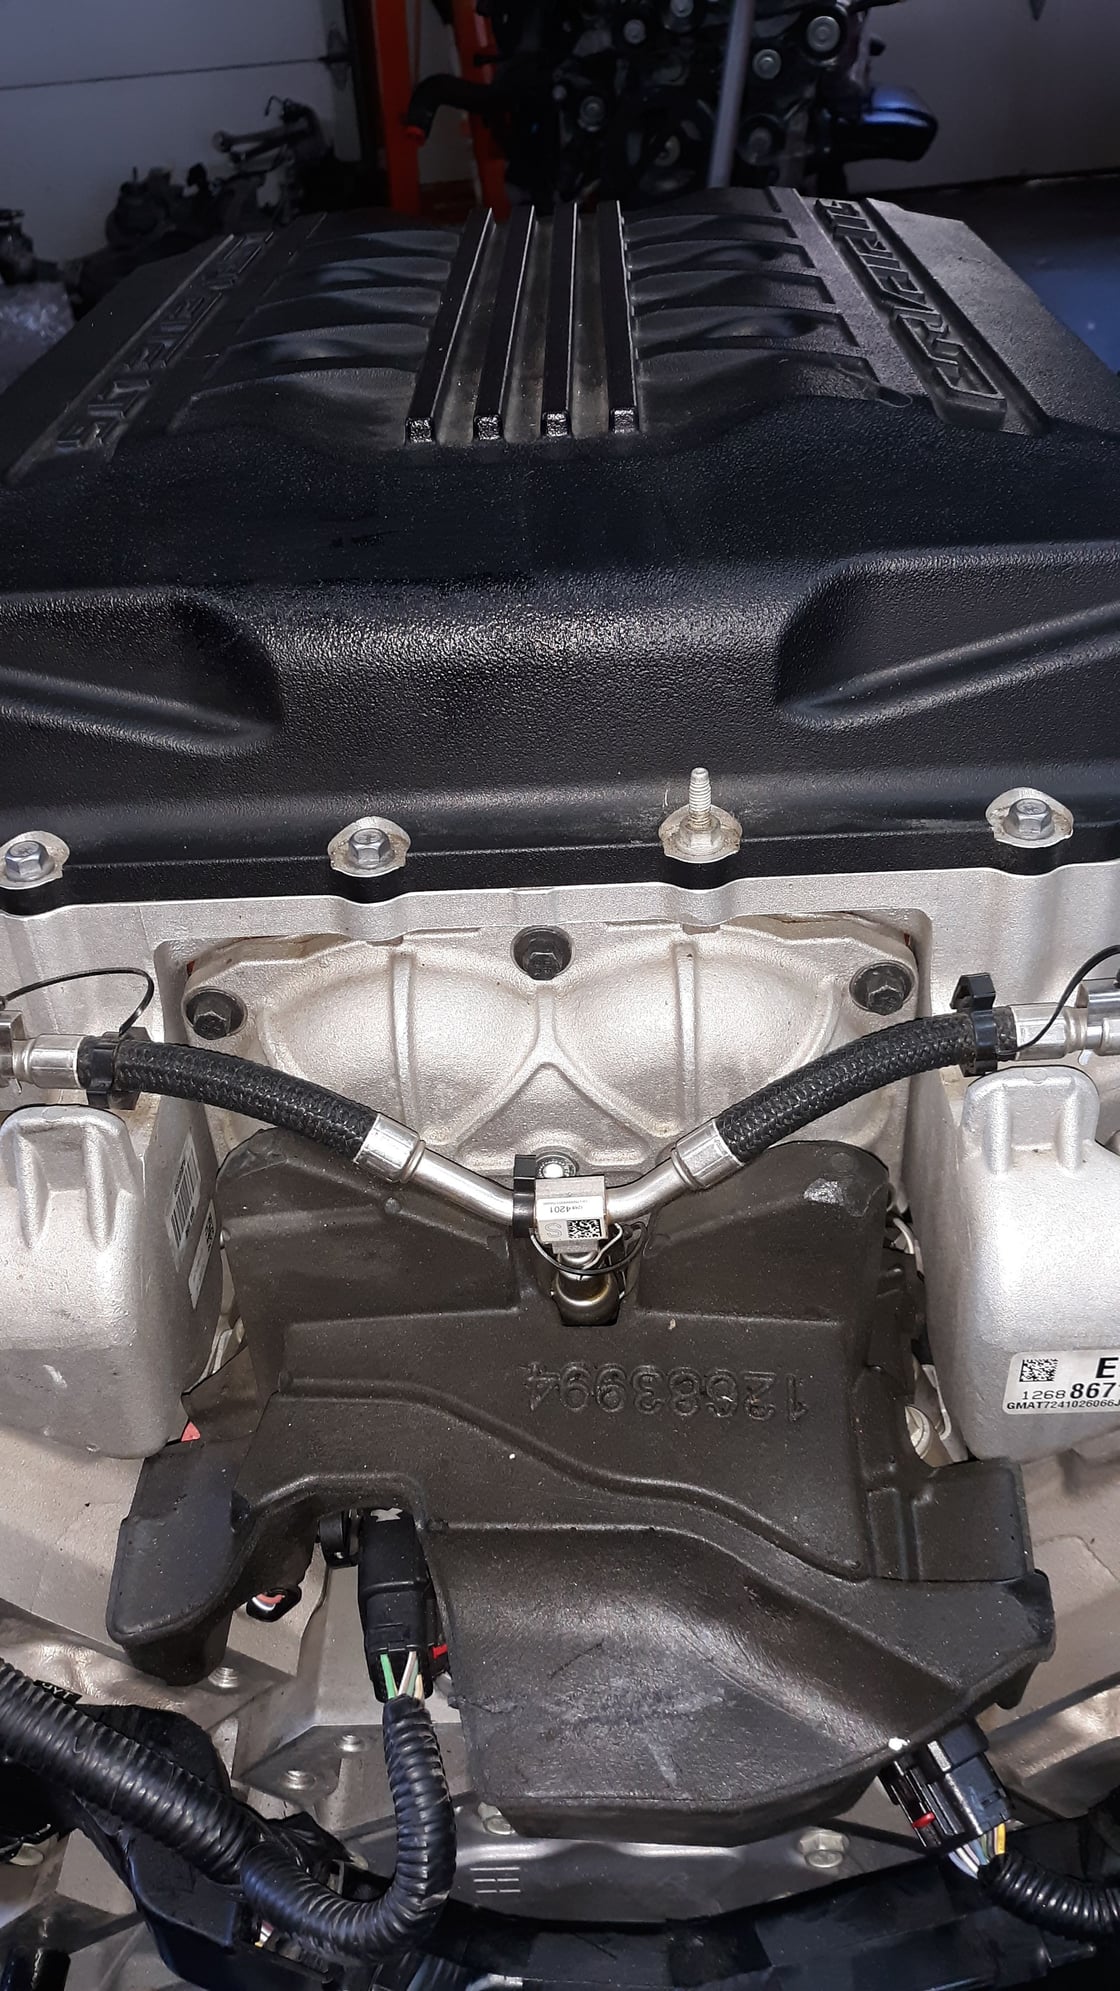 Engine - Complete - 2019 CORVETTE ZR1 LT5 motor with 9k miles in excellent condition $24,500. - Used - 2019 Chevrolet Corvette - Springfield, MO 65810, United States